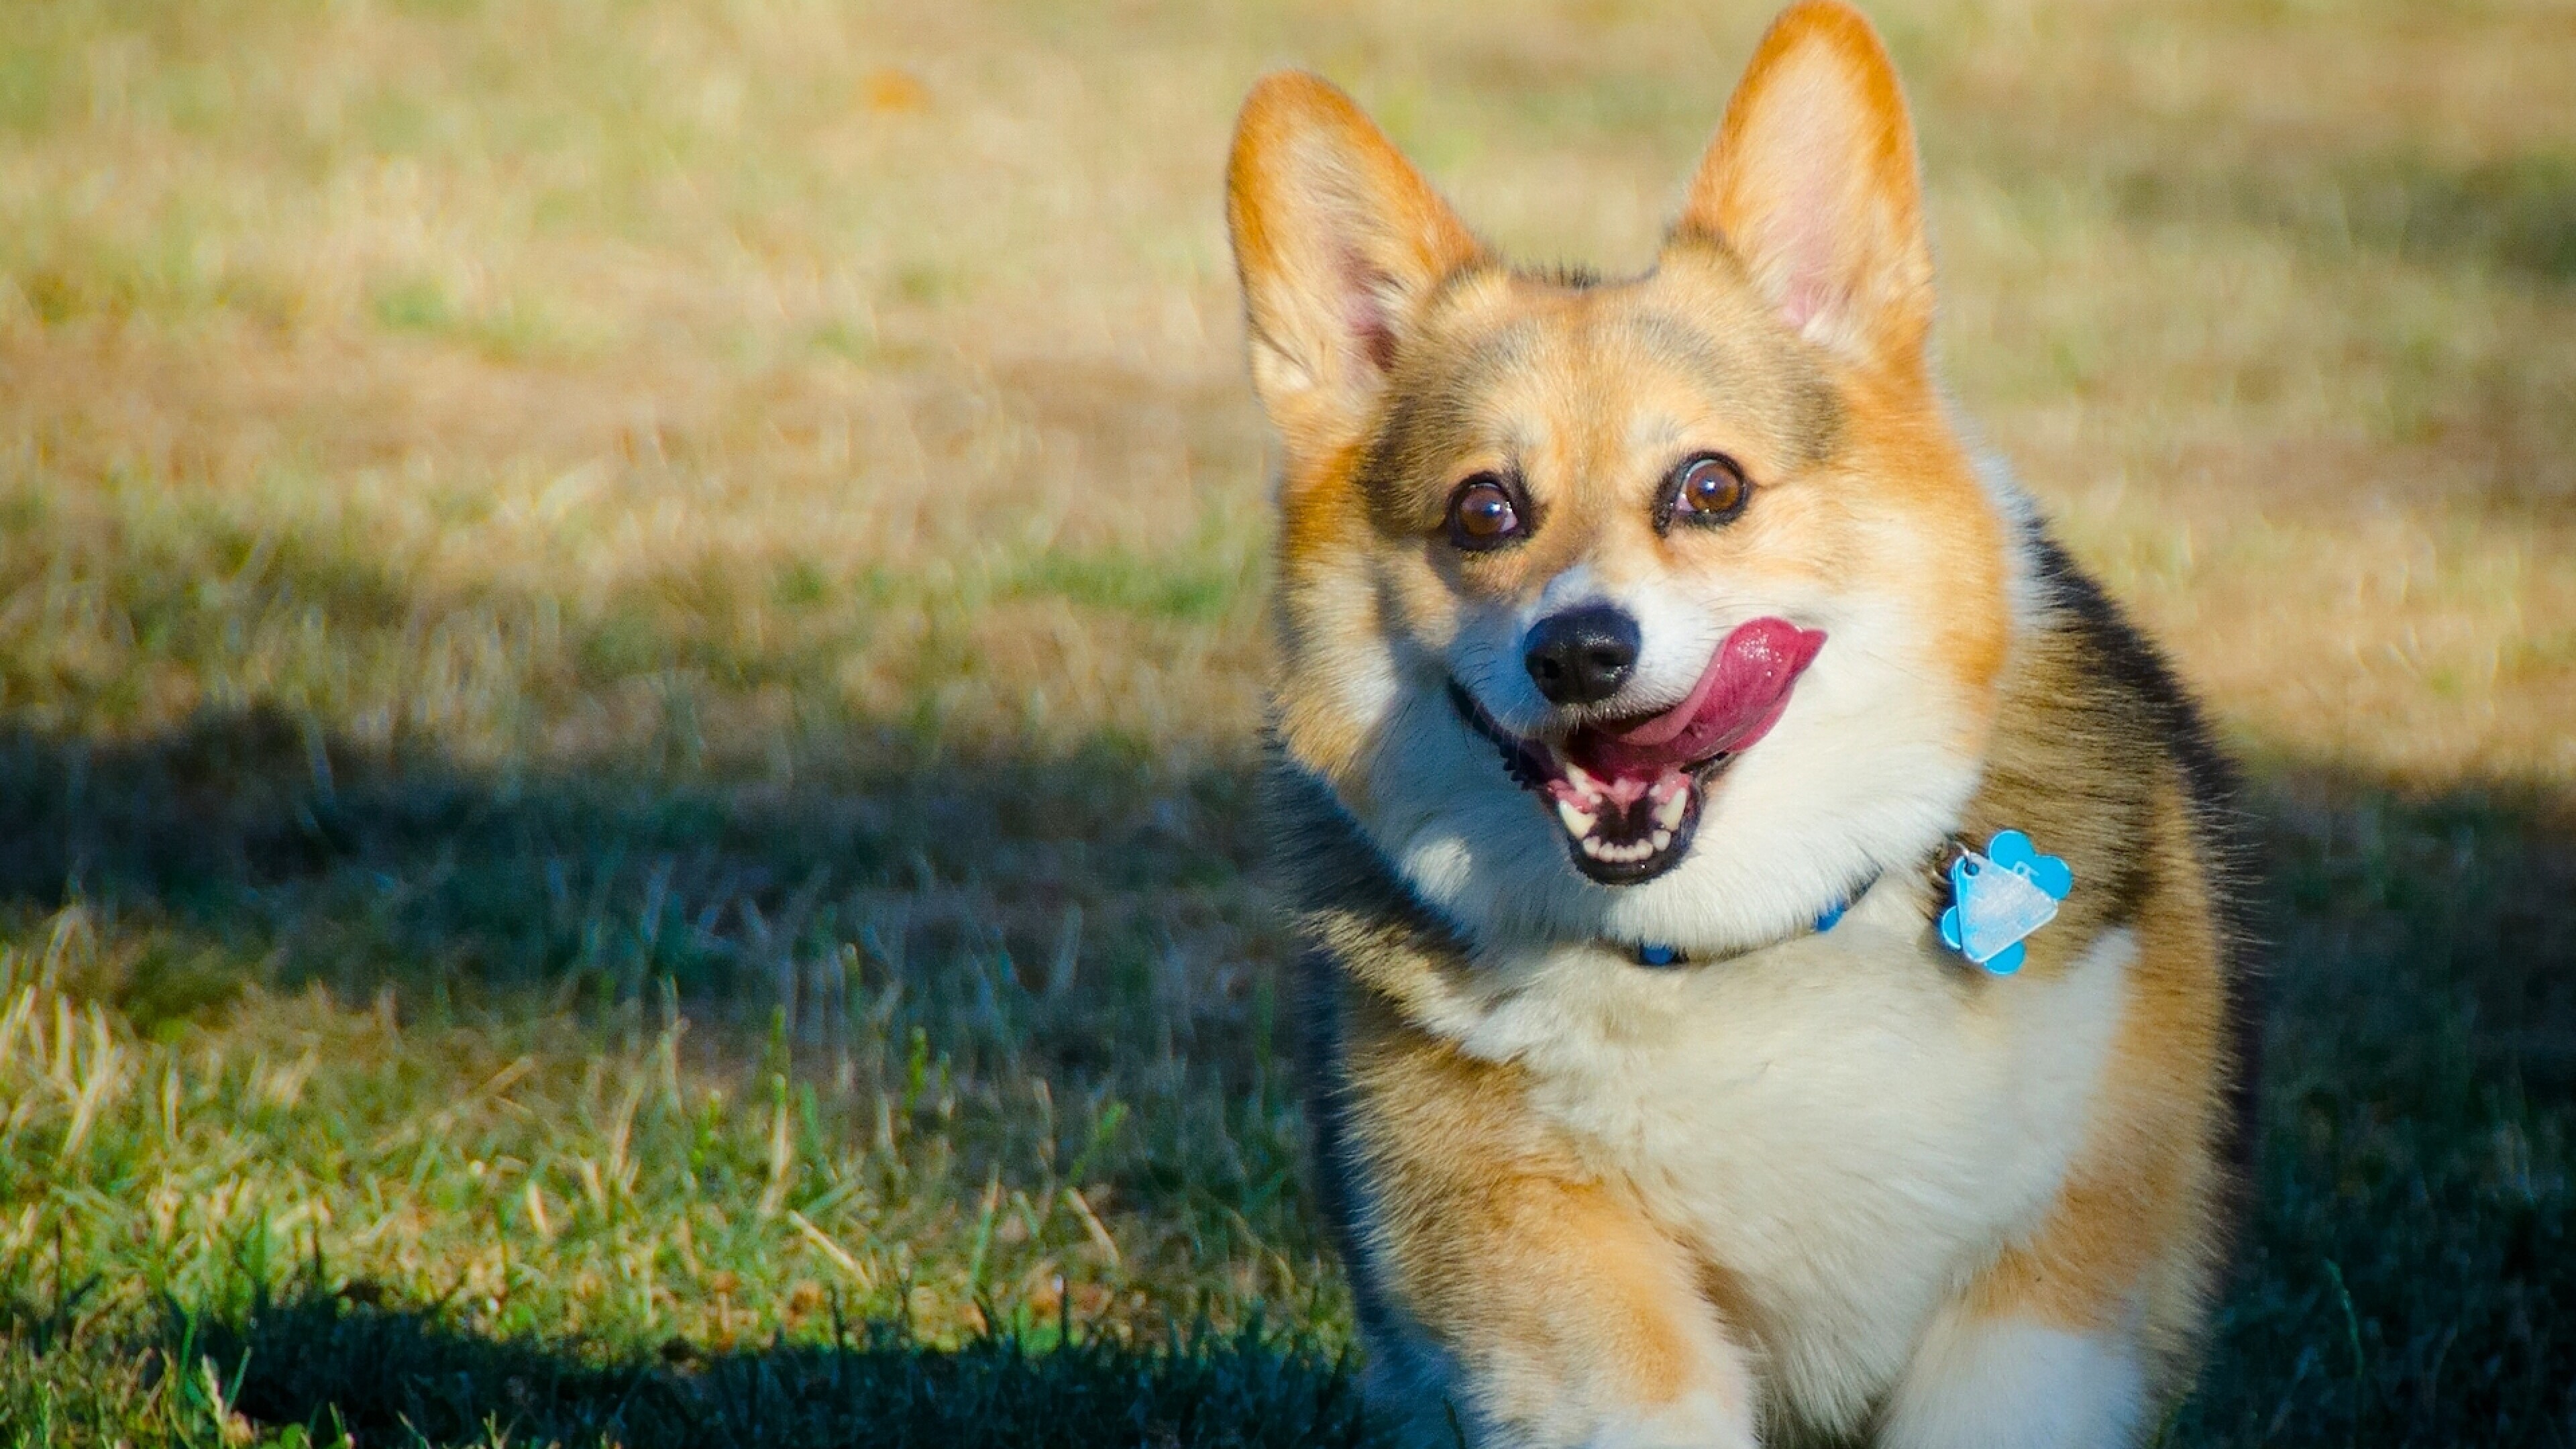 Corgi: A small type of herding dog that originated in Wales. 3840x2160 4K Background.